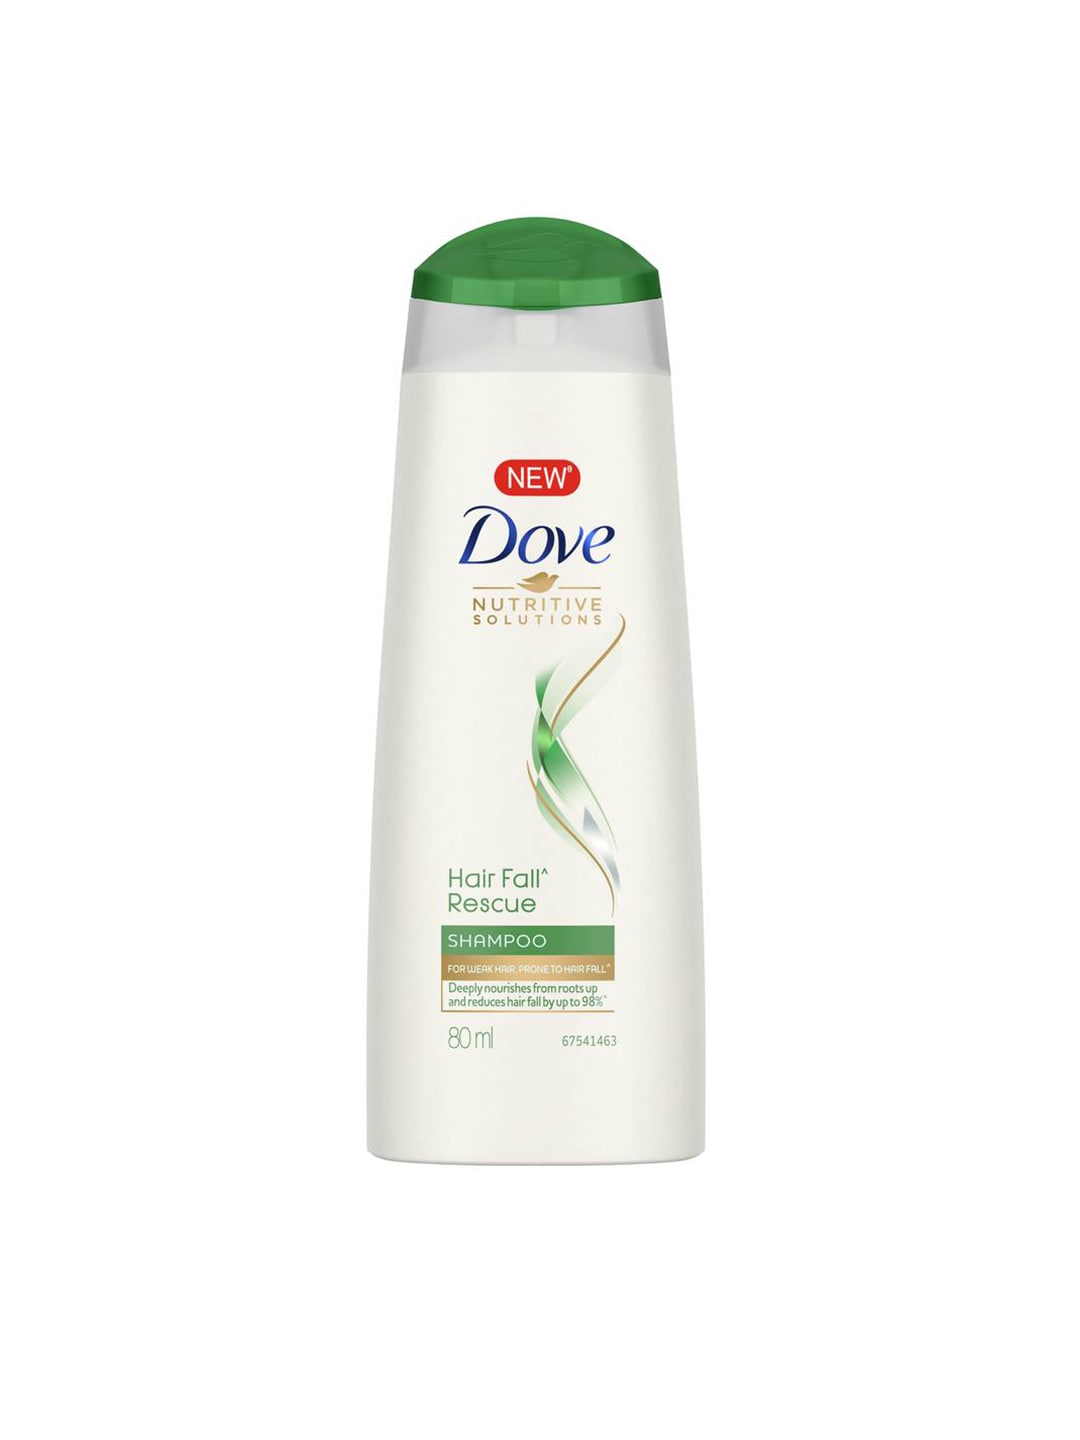 Dove Unisex Hair Fall Rescue Shampoo with Glycerin 80 ml Price in India